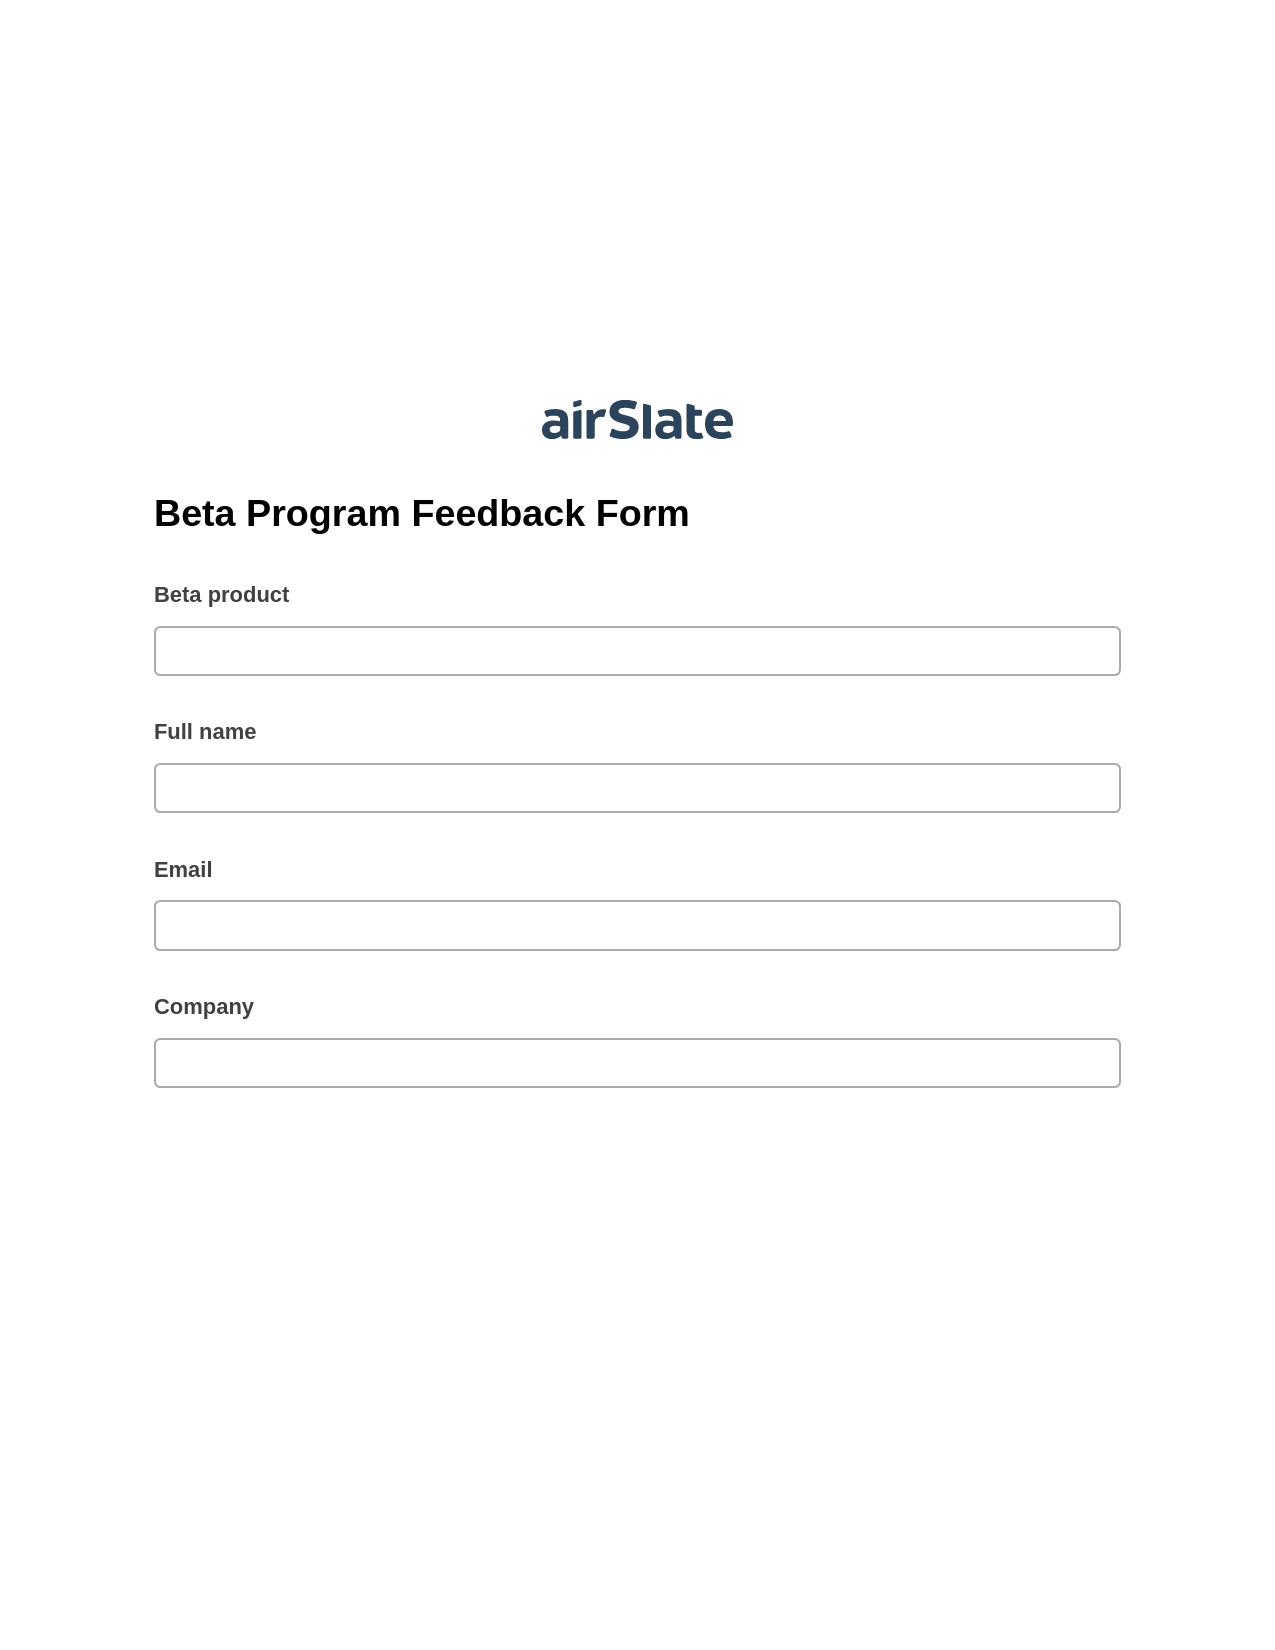 Beta Program Feedback Form Pre-fill Dropdown from Airtable, Open as Role Bot, OneDrive Bot